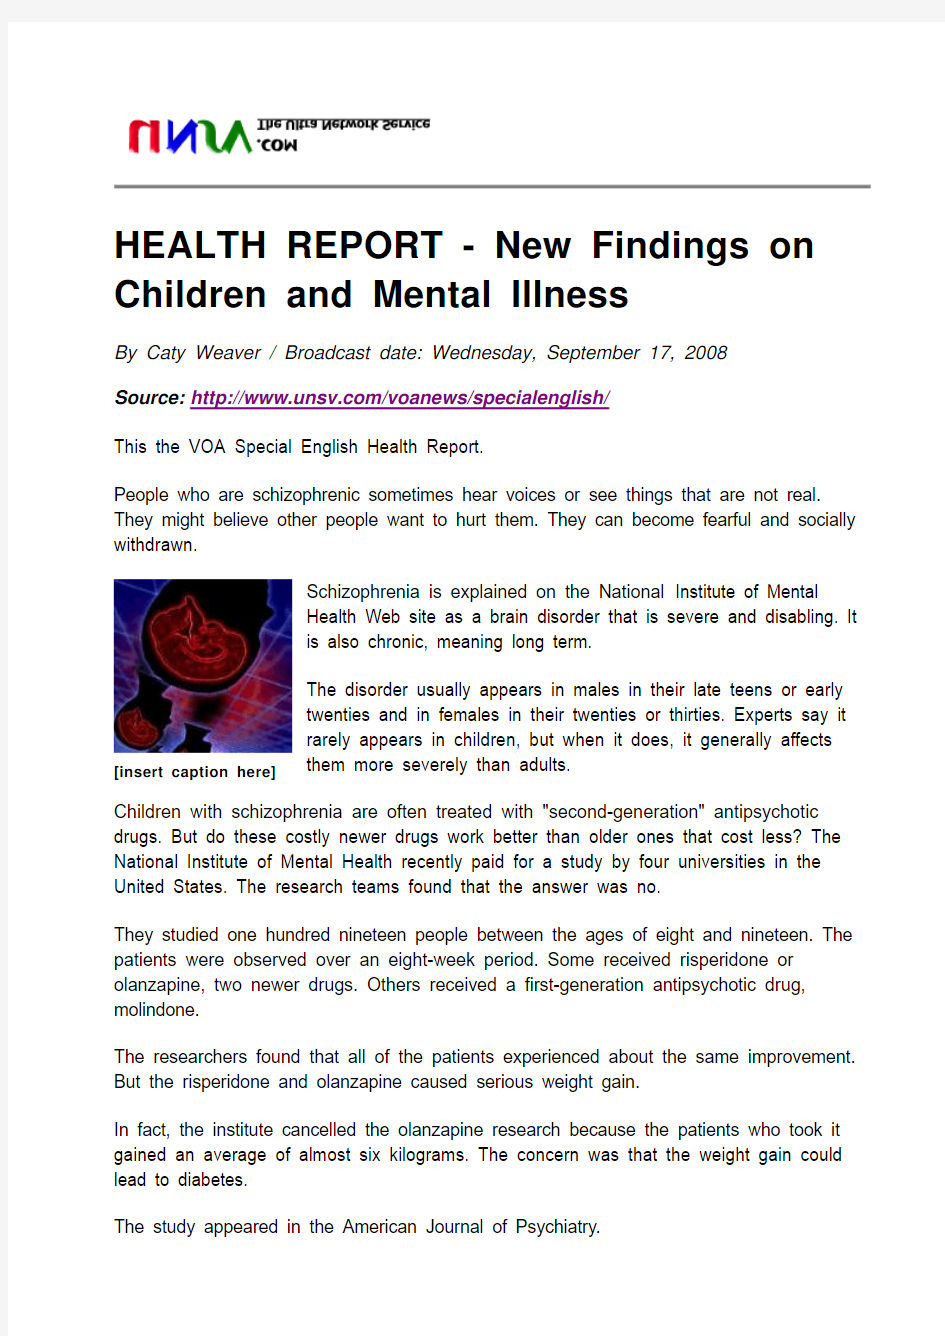 HEALTH REPORT - New Findings on Children and Mental Illness